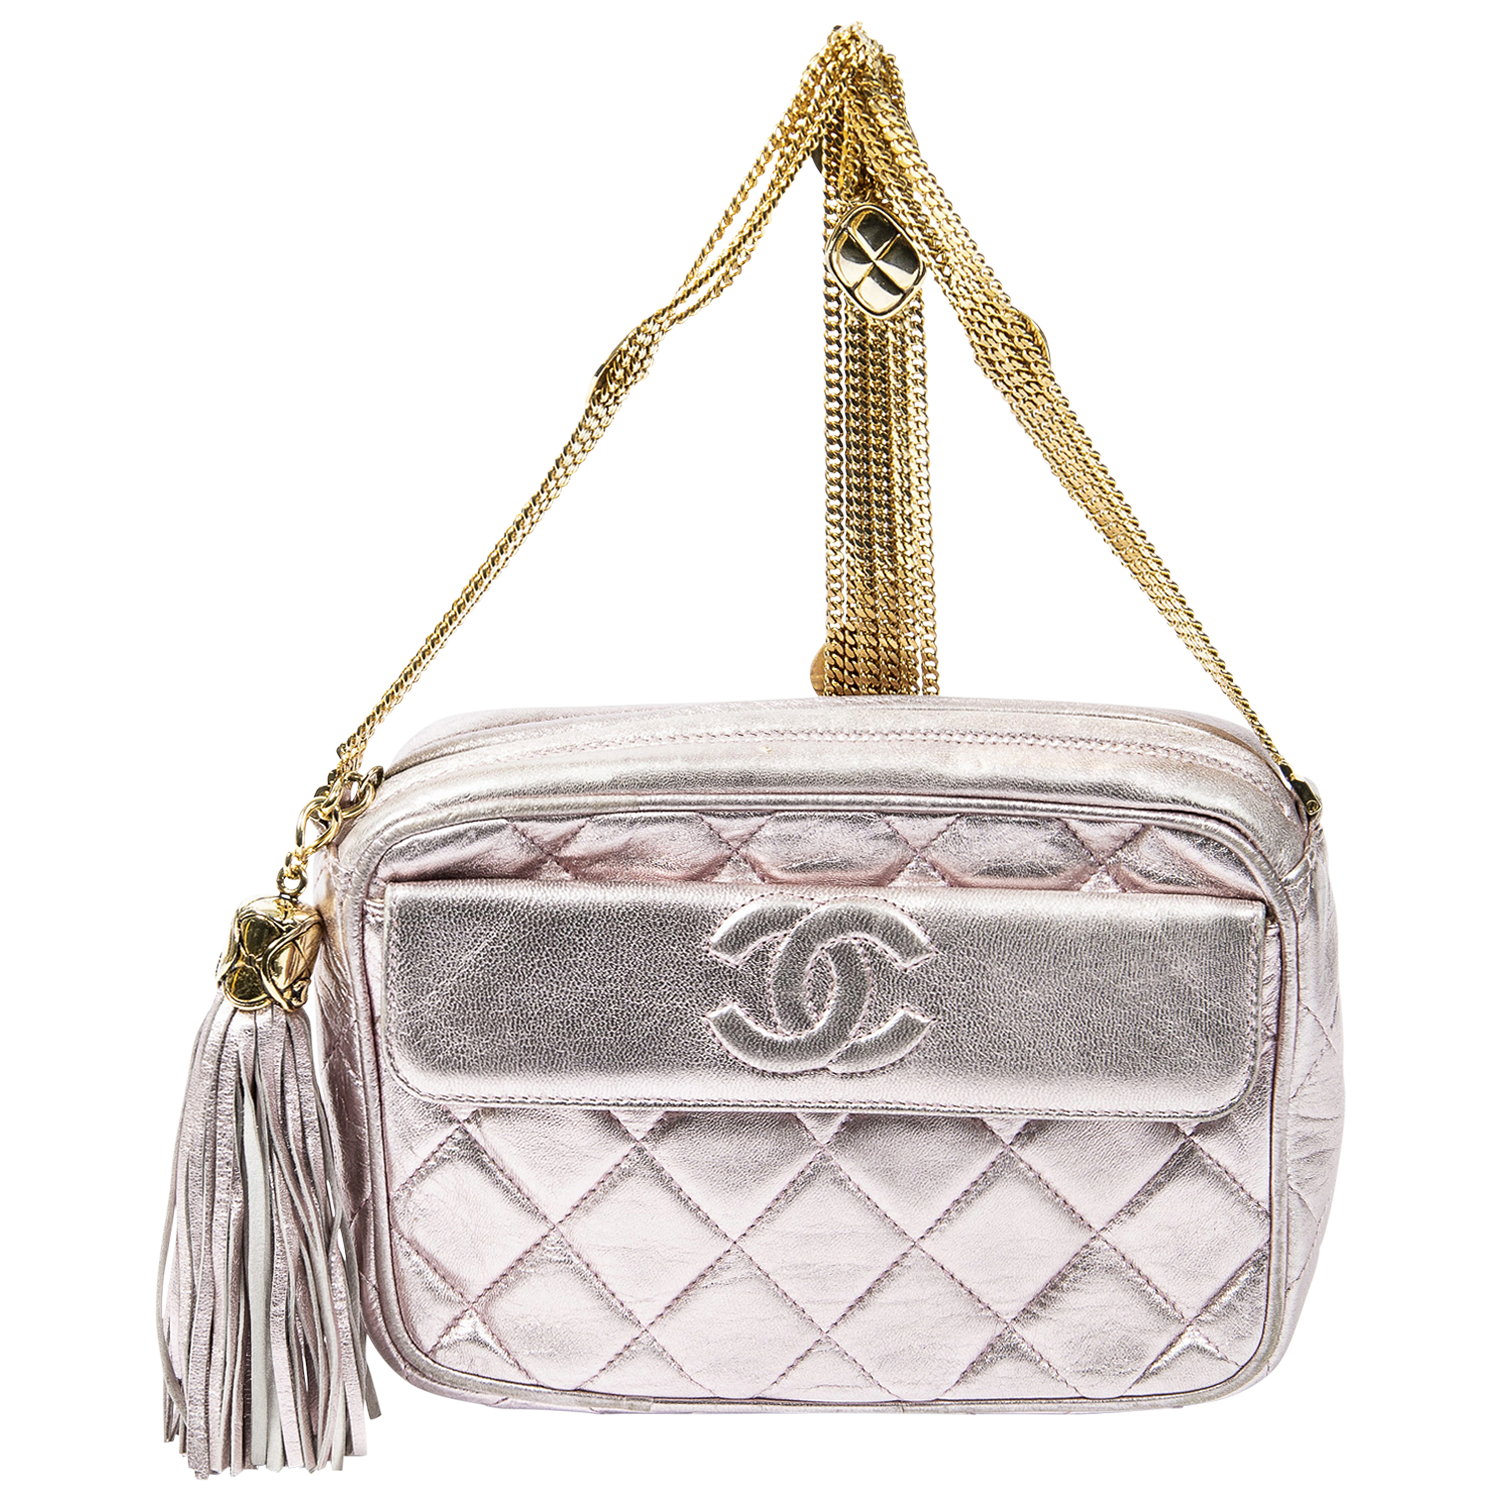 2009 Chanel Flap - 315 For Sale on 1stDibs